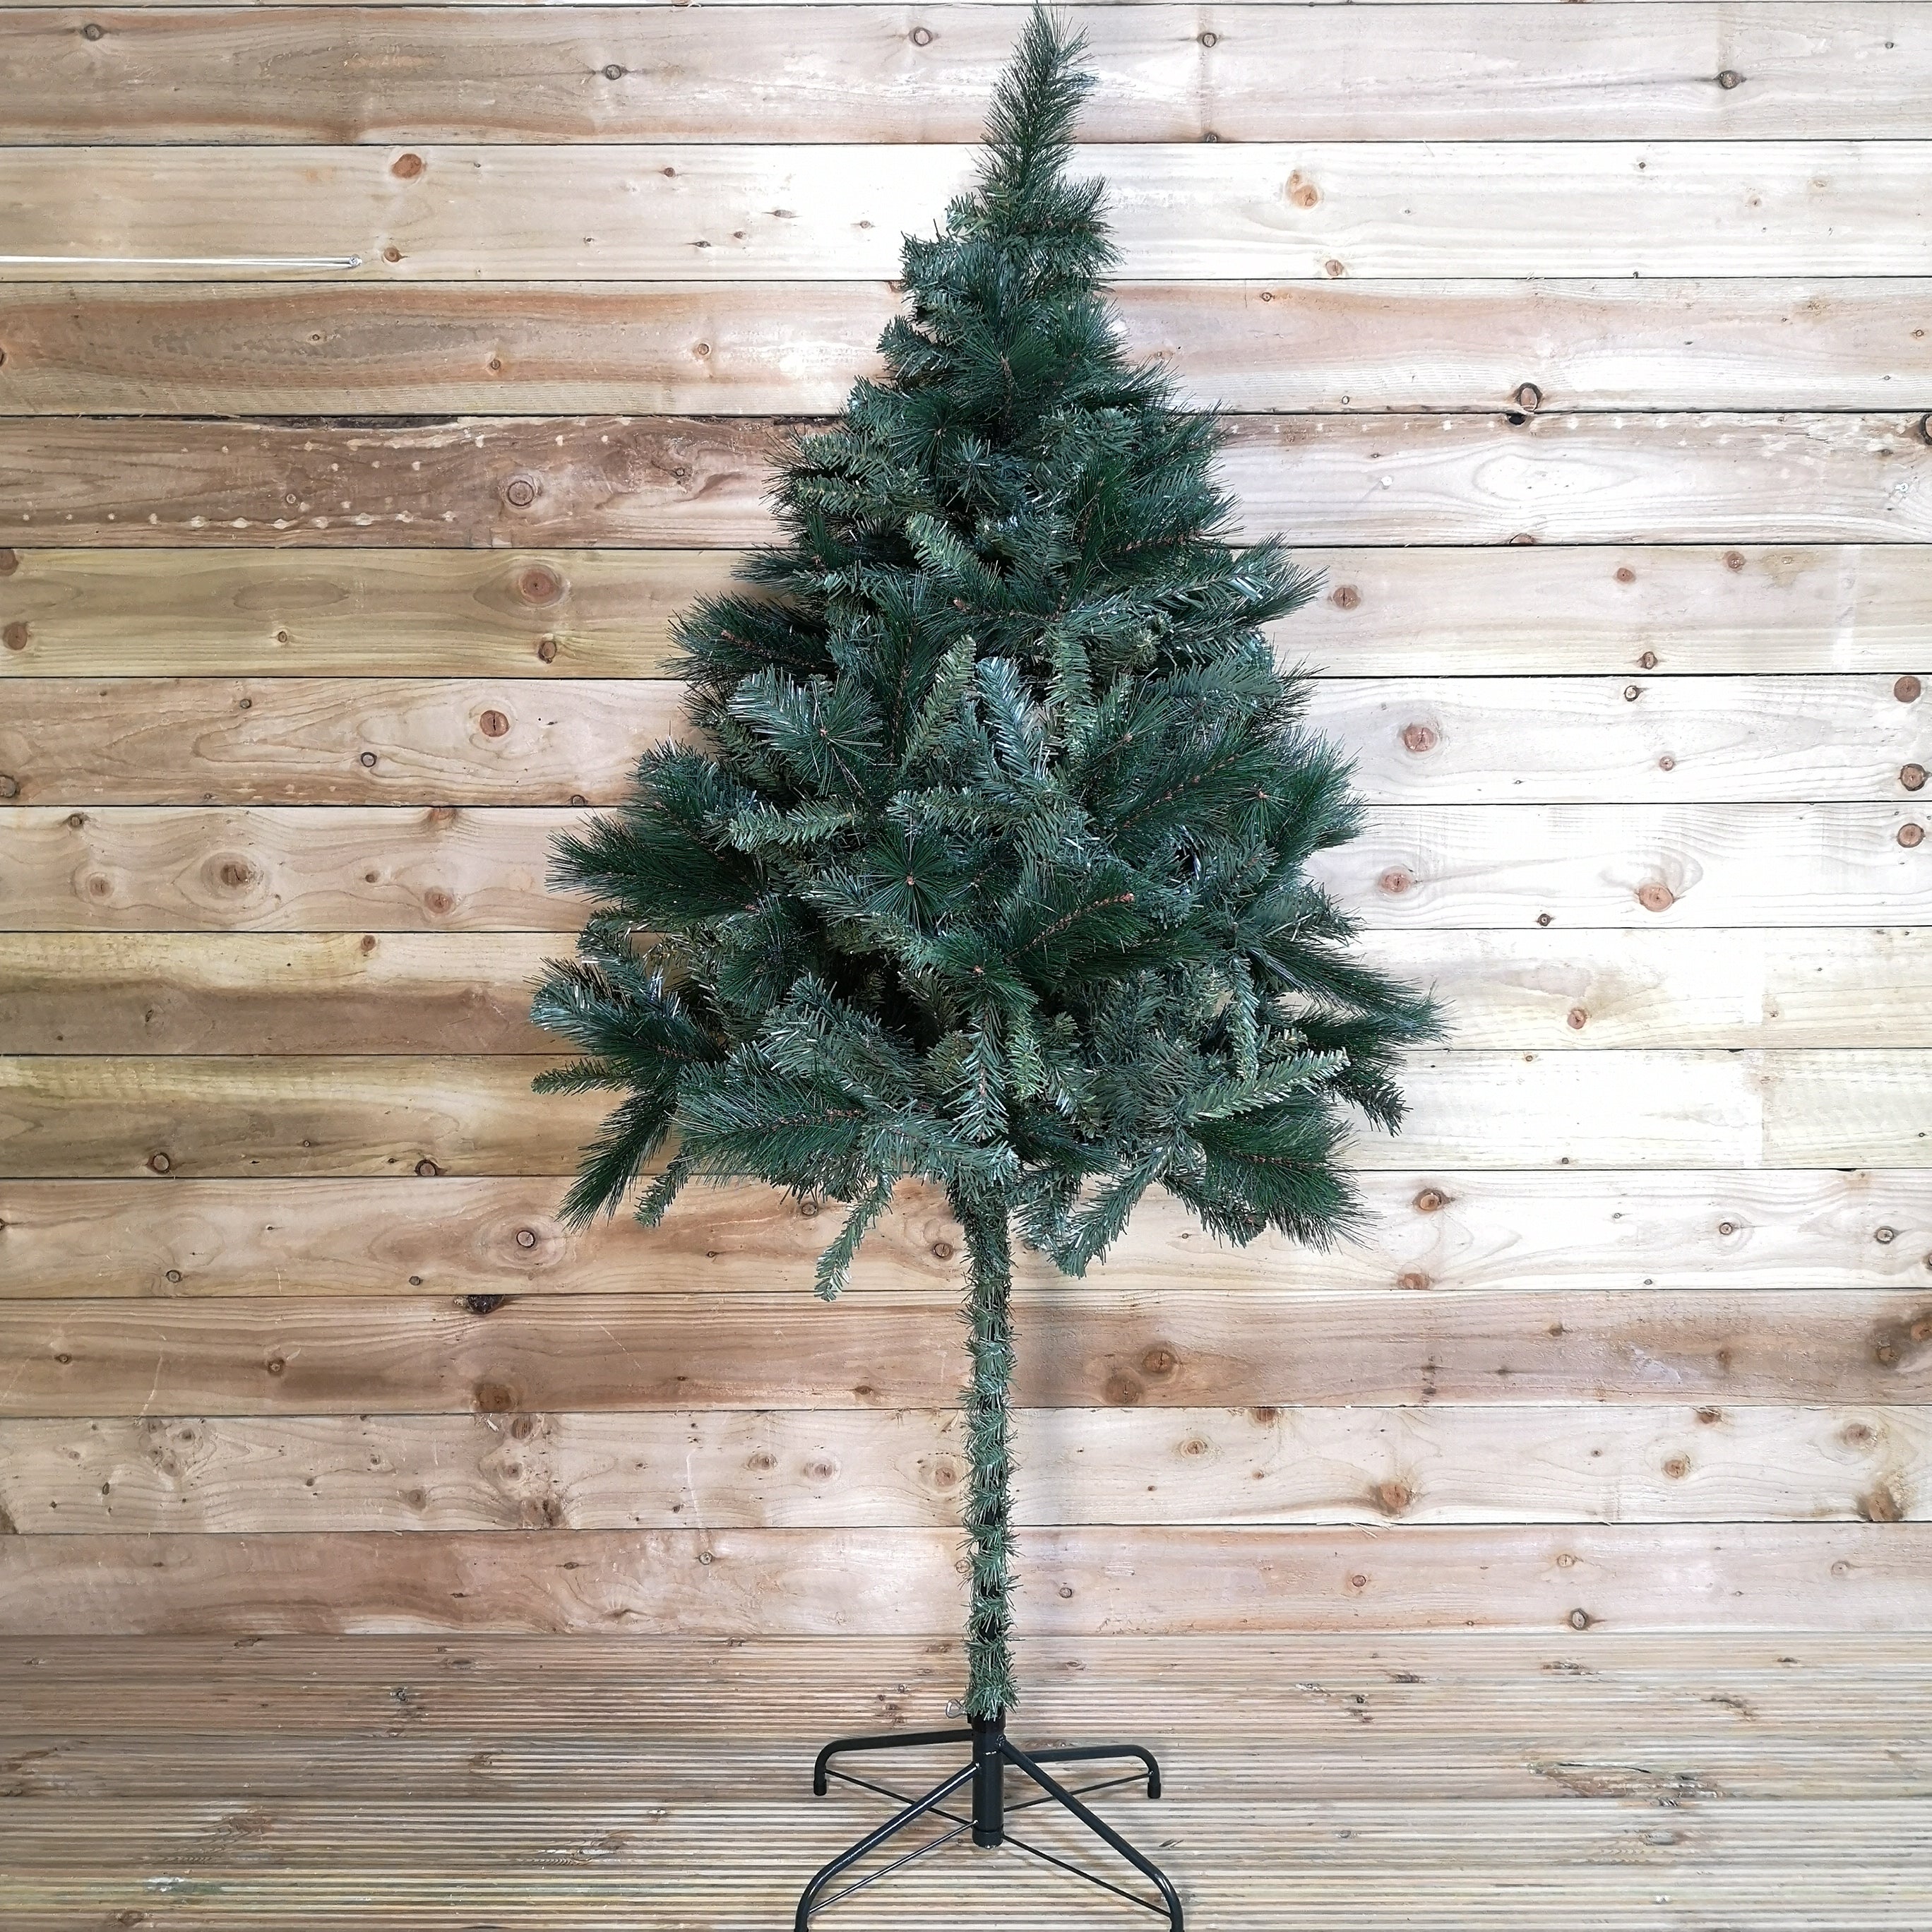 6ft (1.8m) Premier PVC Space Saving Christmas Parasol Tree with 408 Tips in Green